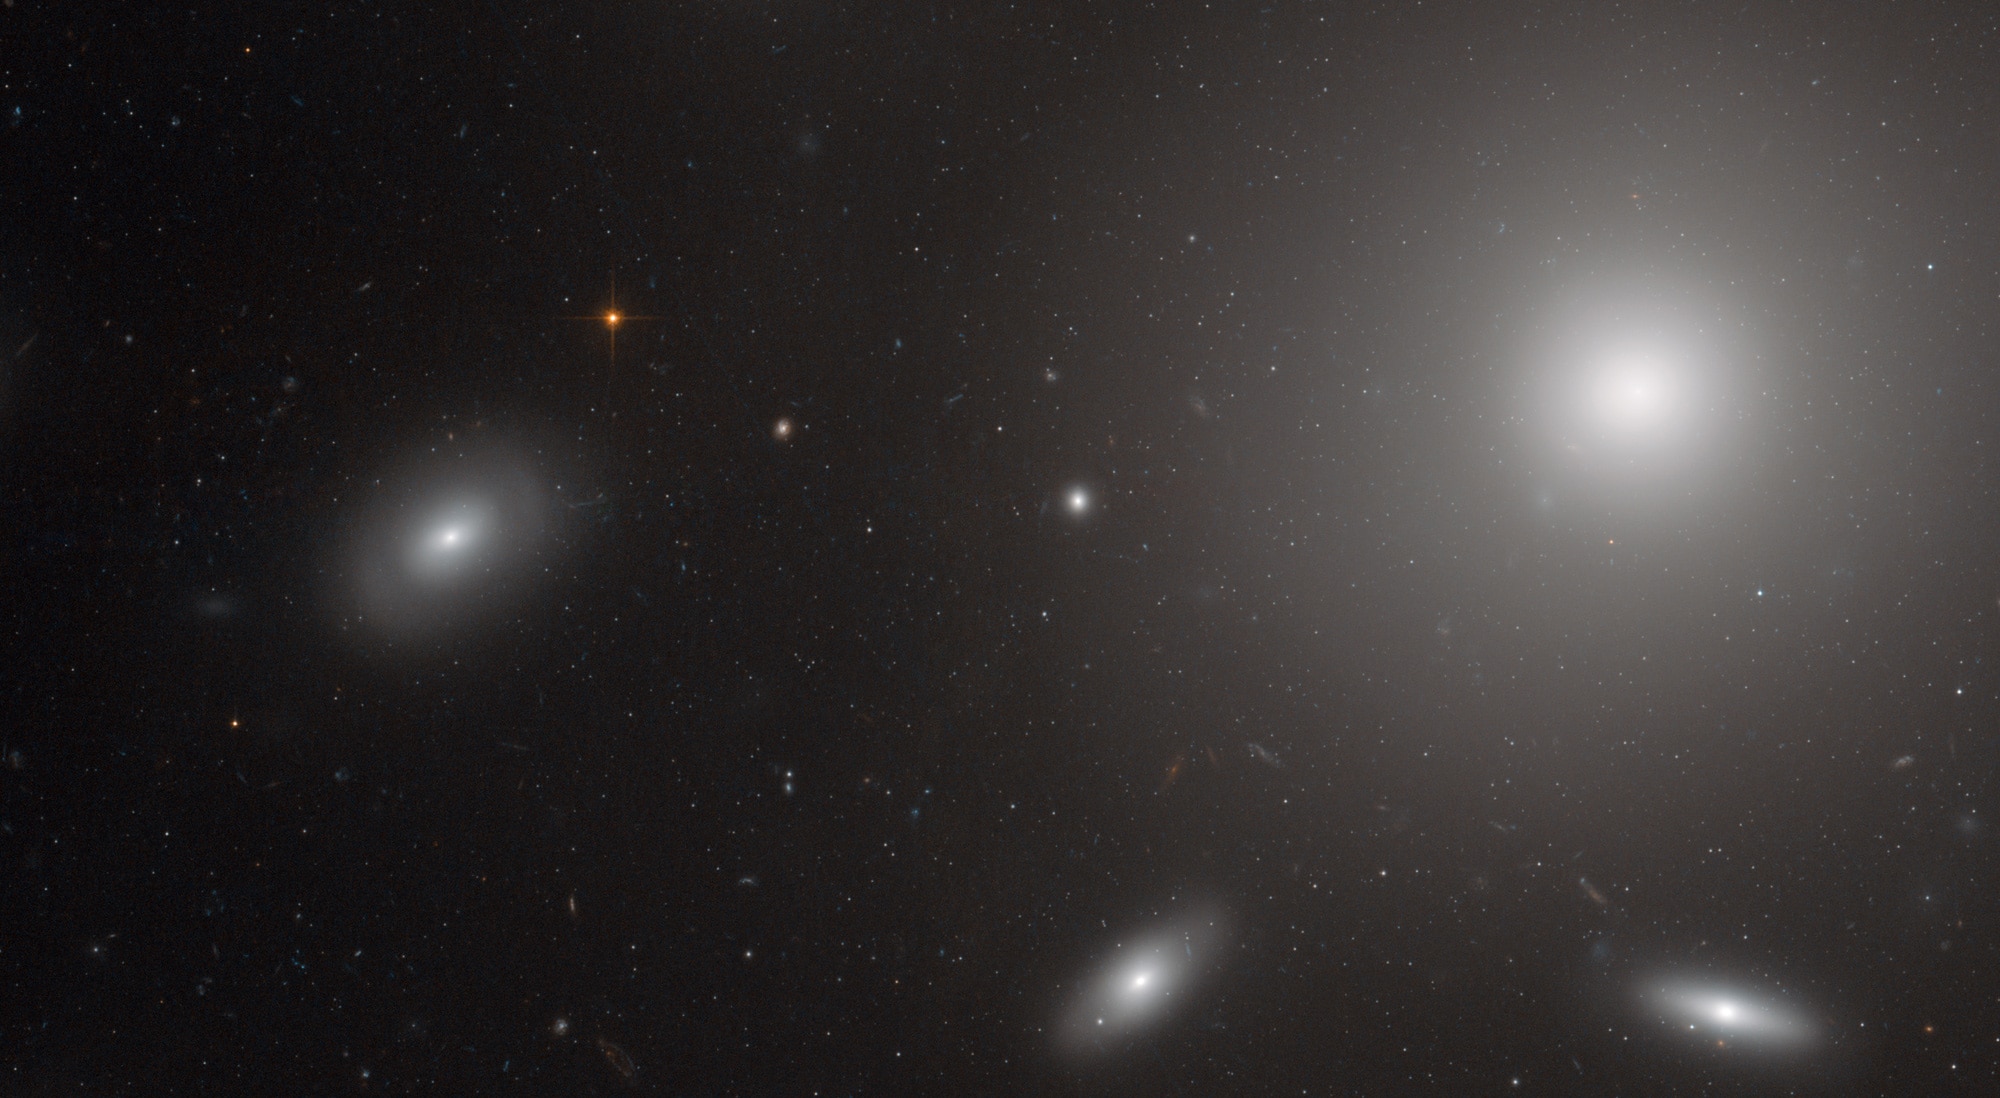 NGC 6874, a huge elliptical galaxy, surrounded by Coma Cluster galaxies, and tens of thousands of globular clusters. Credit: ESA/Hubble & NASA 